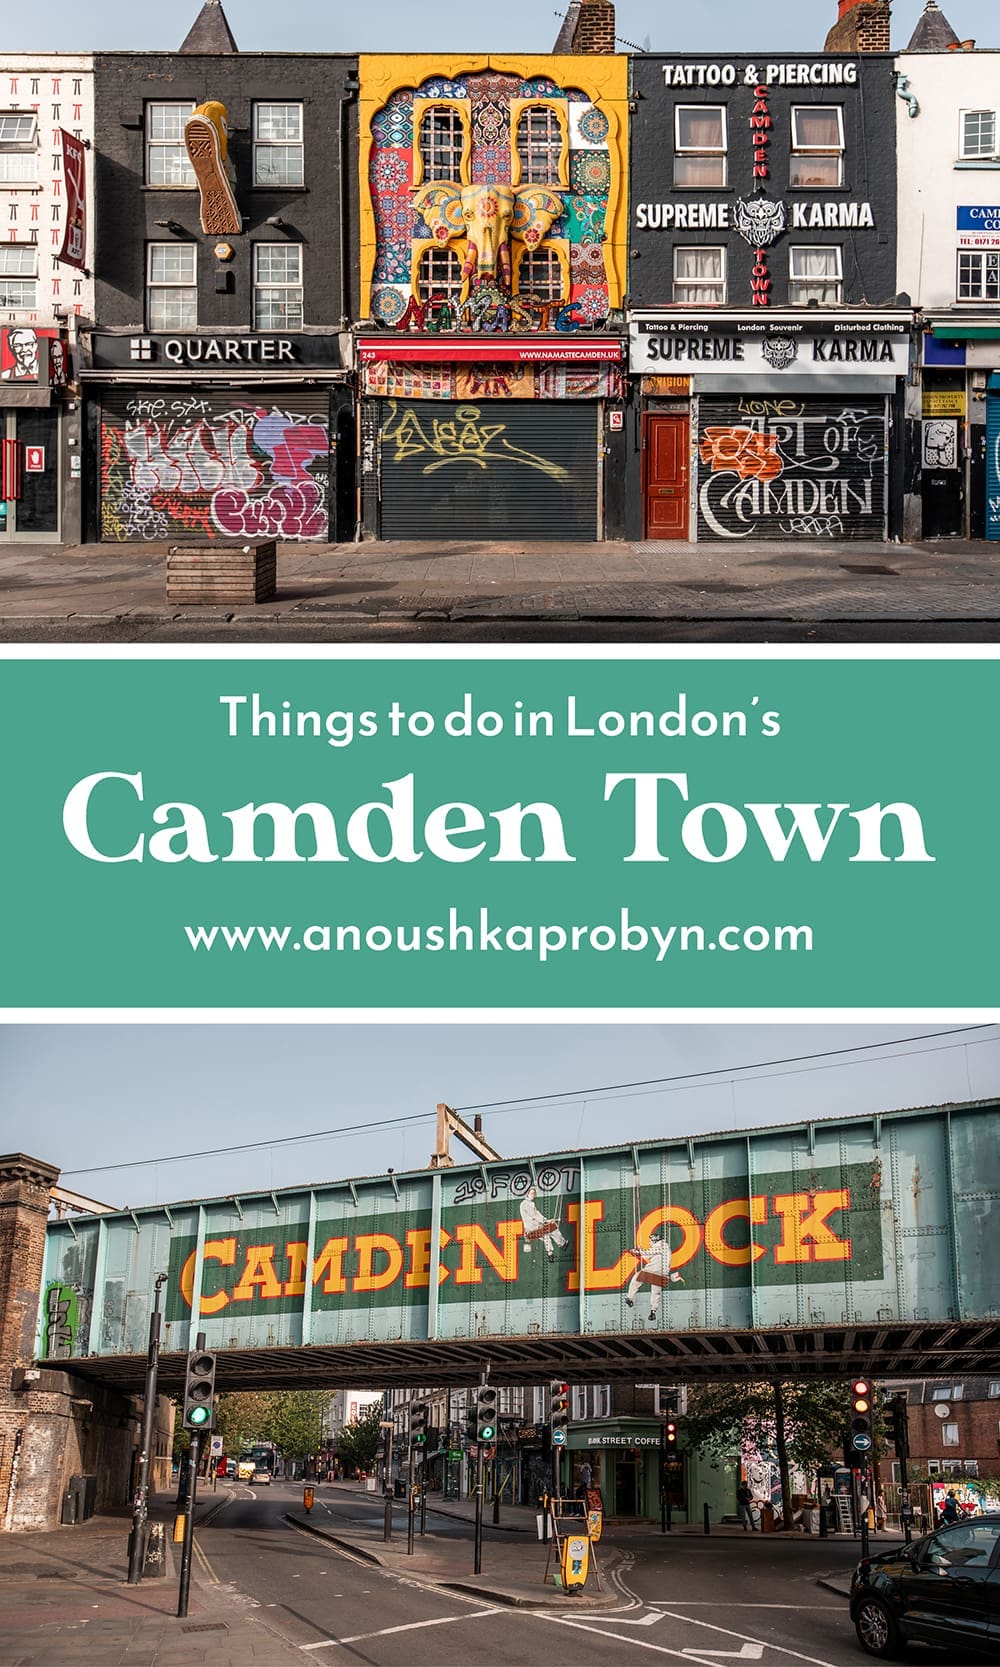 Things to do in Camden Town London Travel Guide